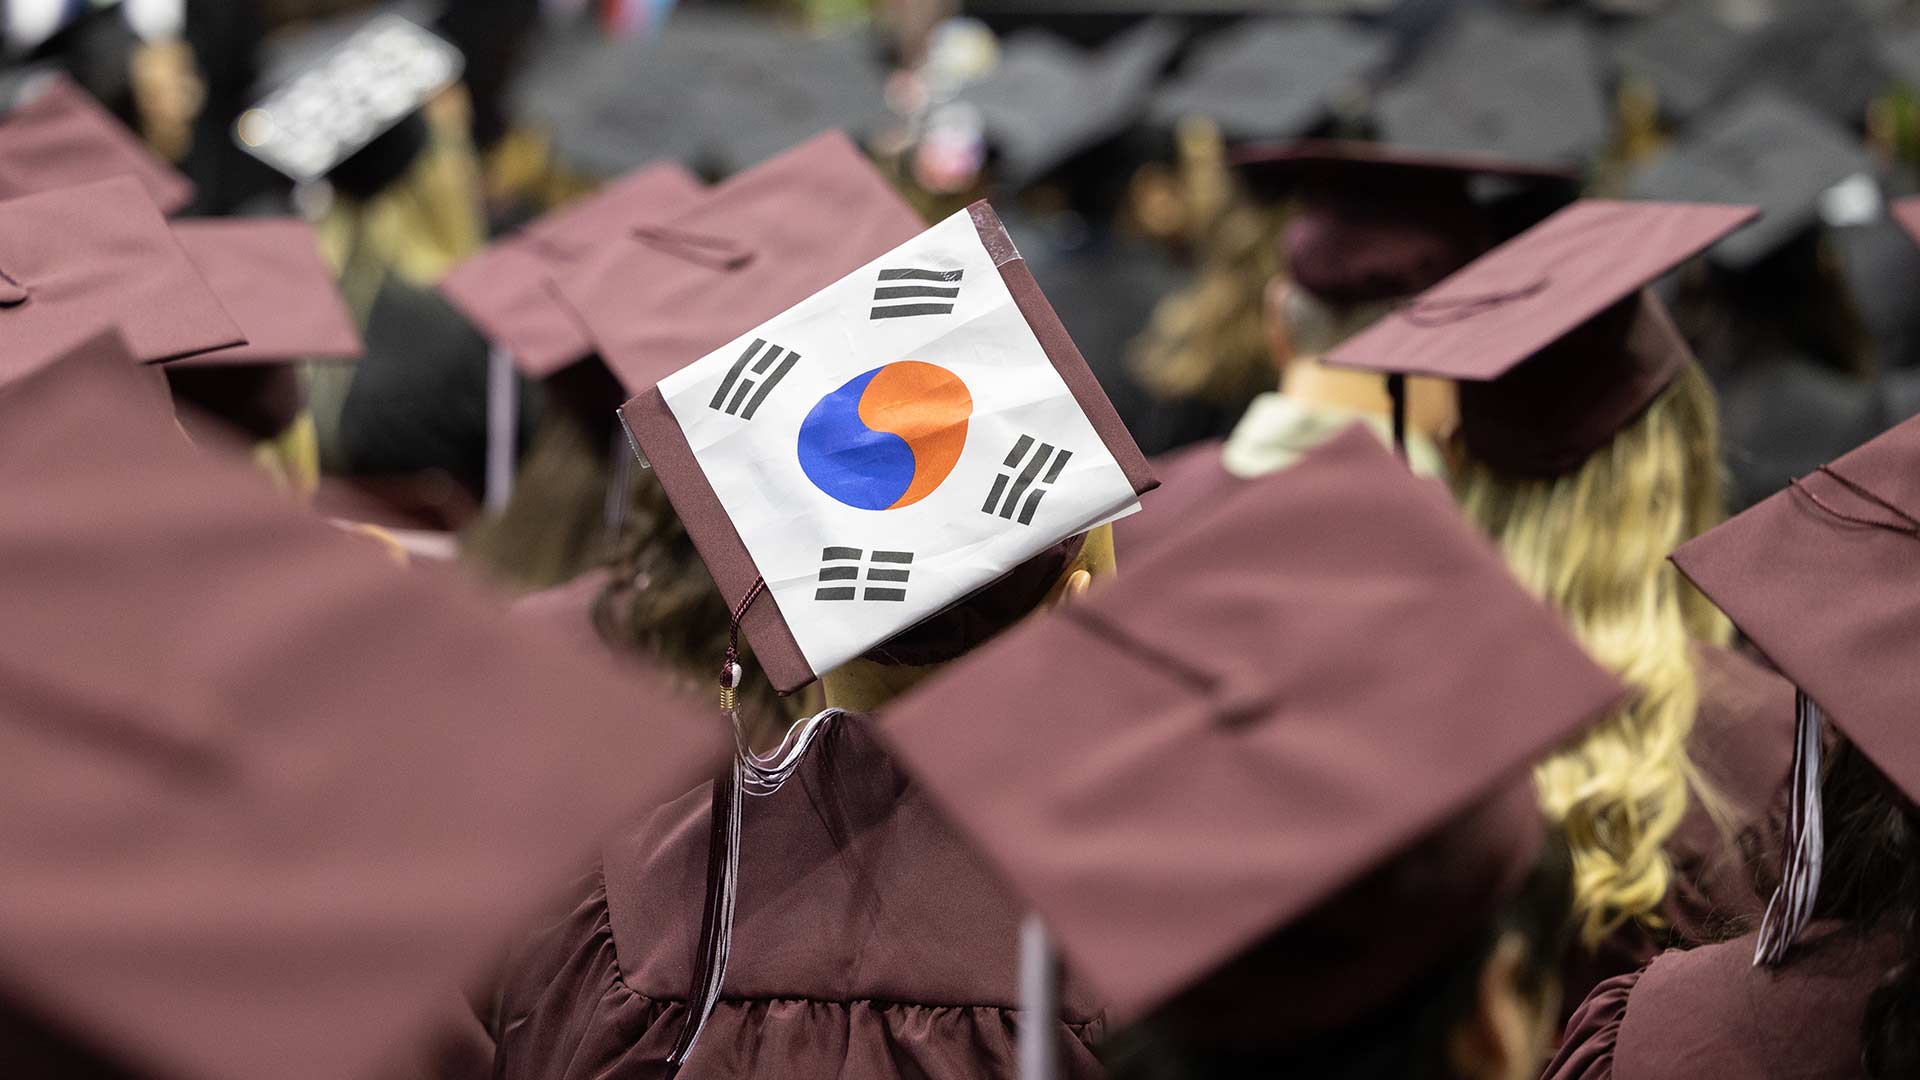 A drawing of the South Korea flag, the Taegeukgi, taped on a student's mortarboard during a commencement ceremony.